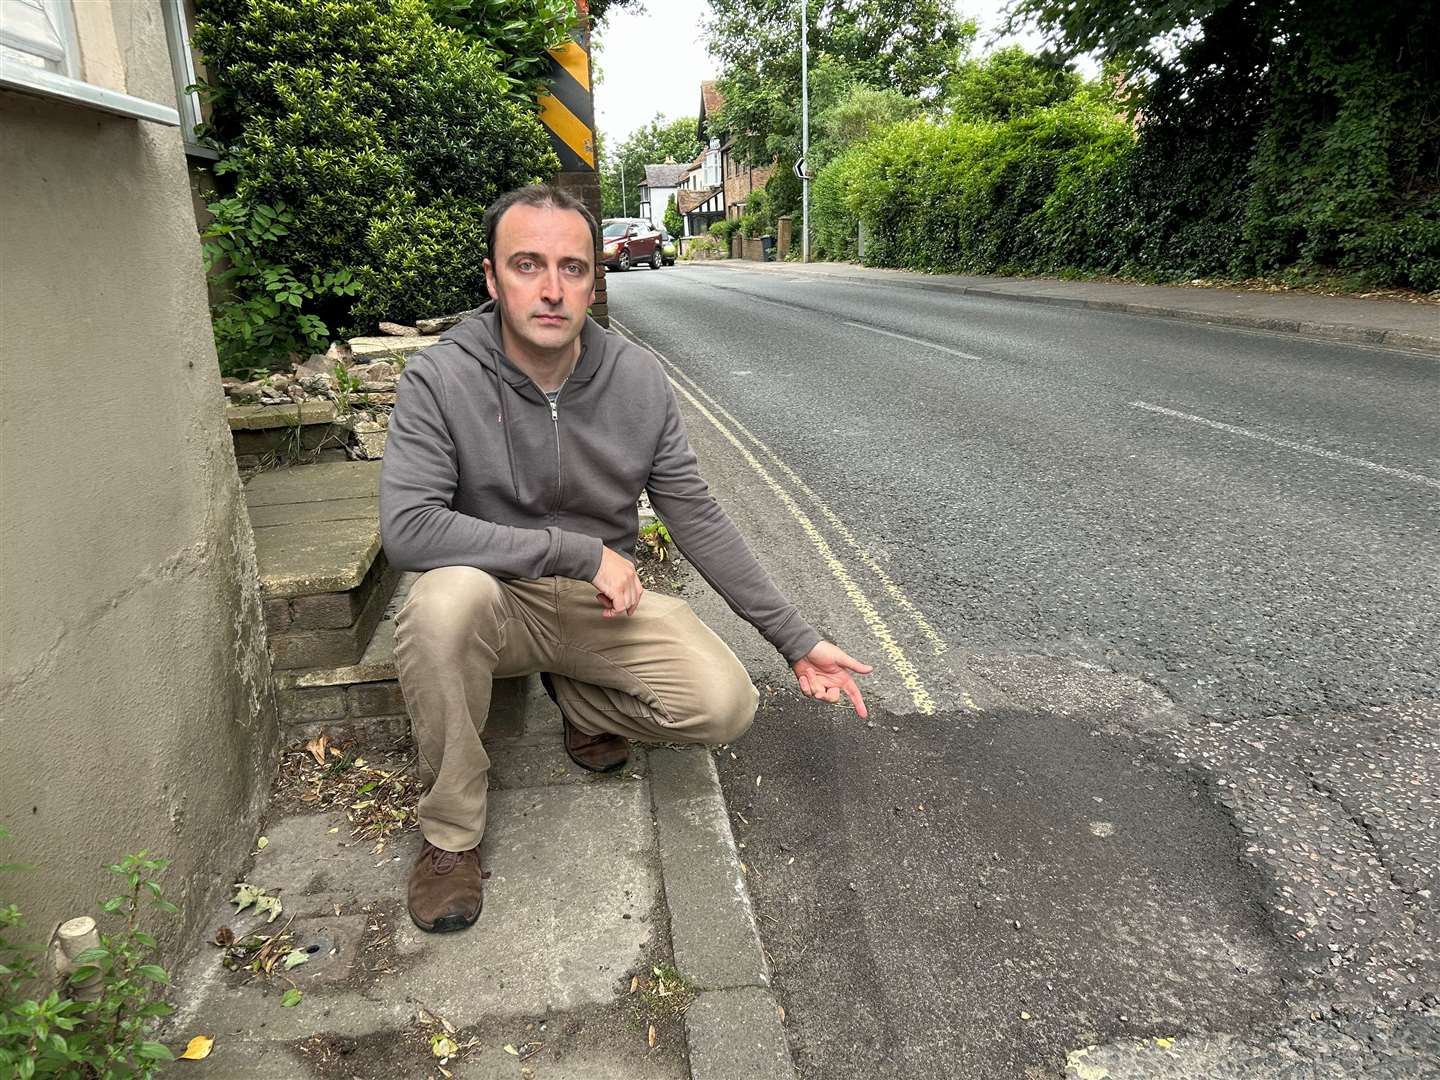 Dr Tom Nichols says a safety bollard has not been replaced near his home after a recent crash